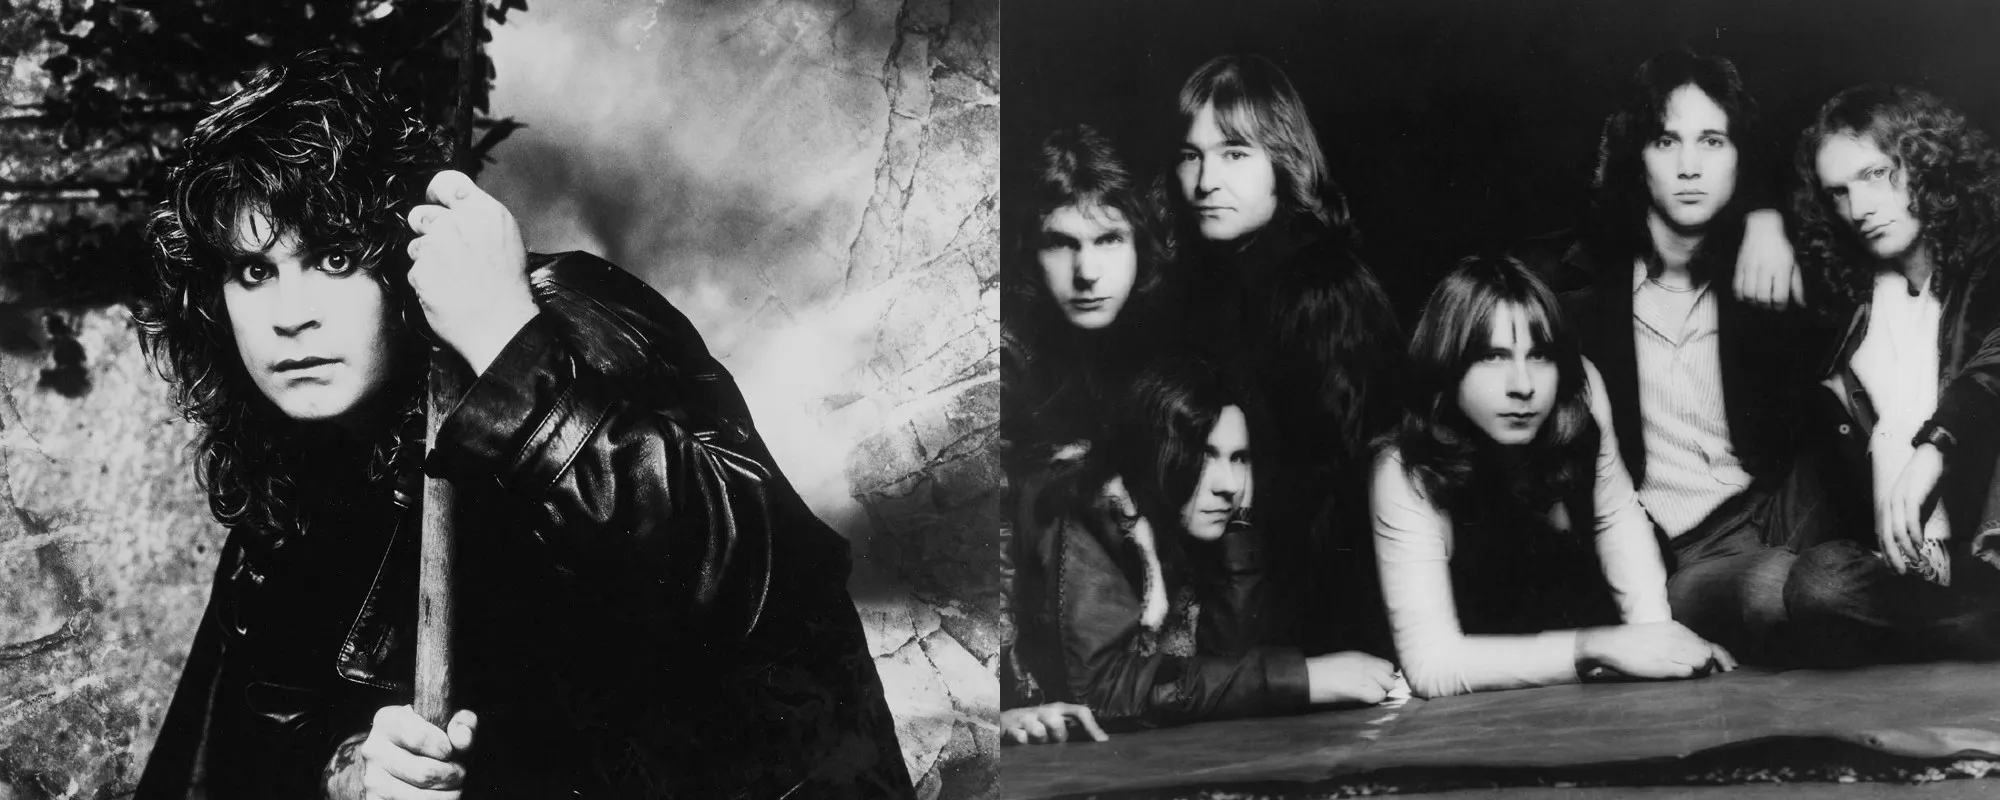 New Rock & Roll Hall of Fame Inductees Foreigner, Ozzy Osbourne, & Peter Frampton React to Honor